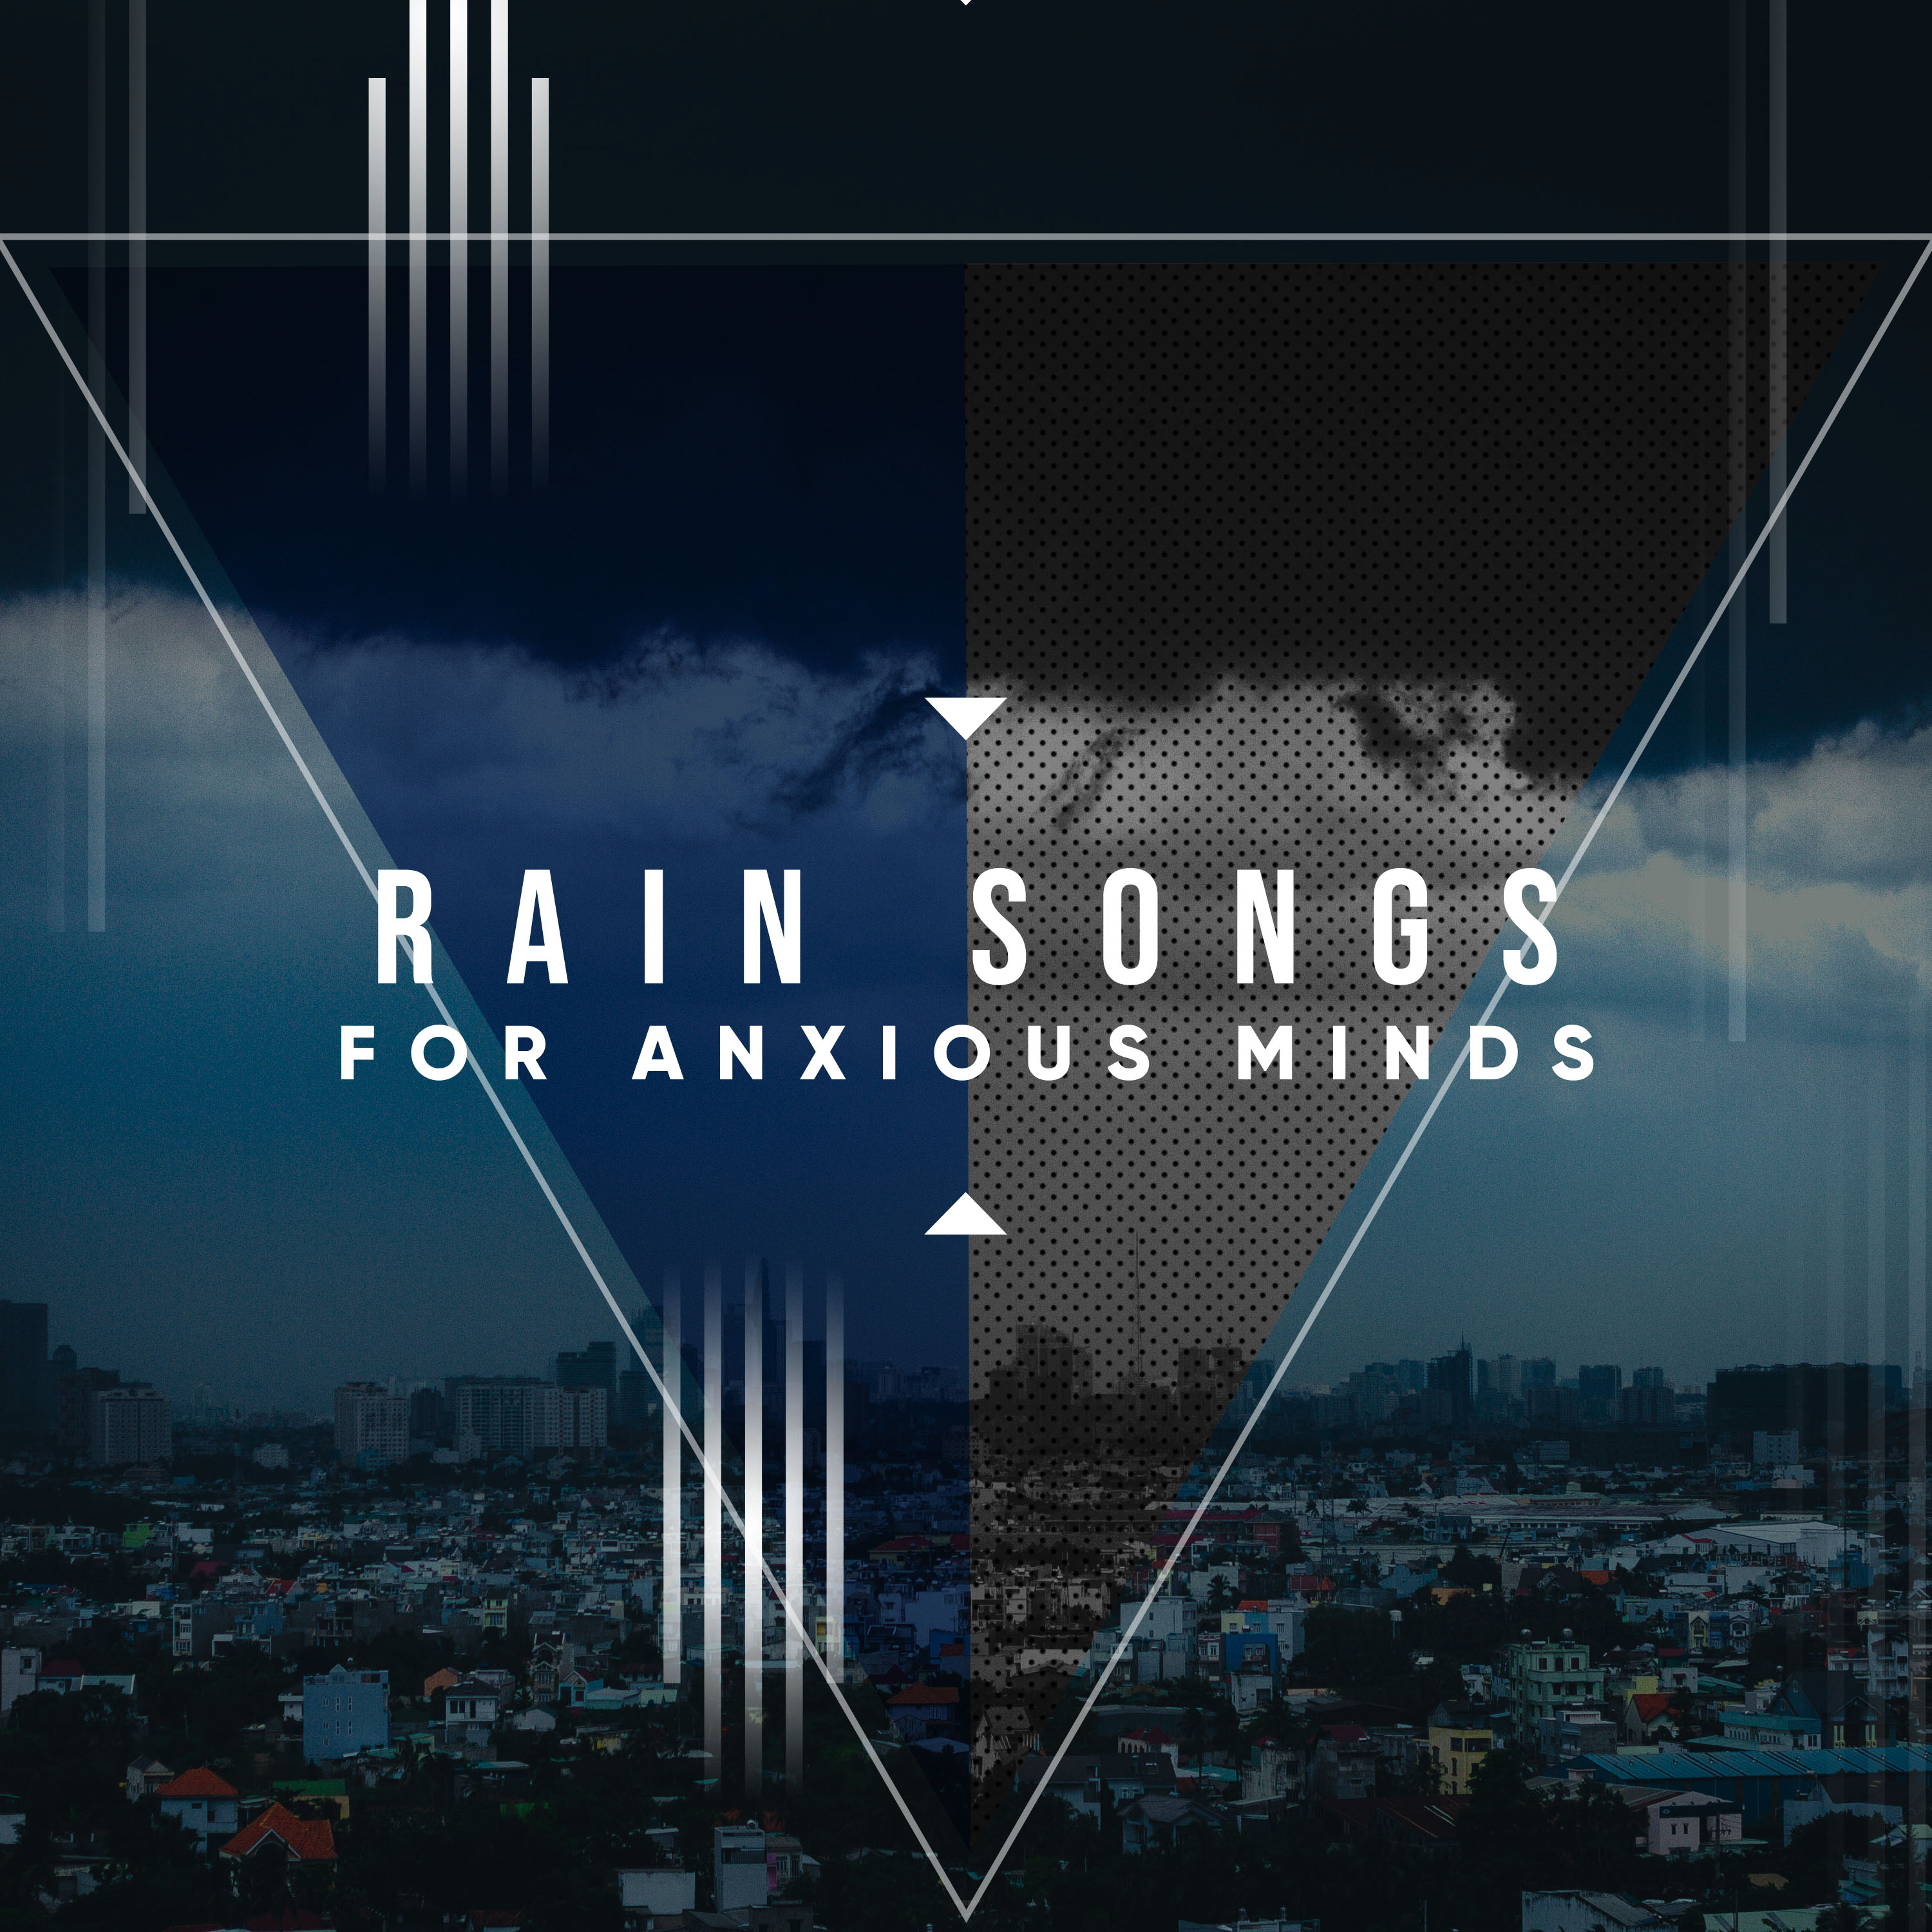 16 RainSongs for Anxious Minds